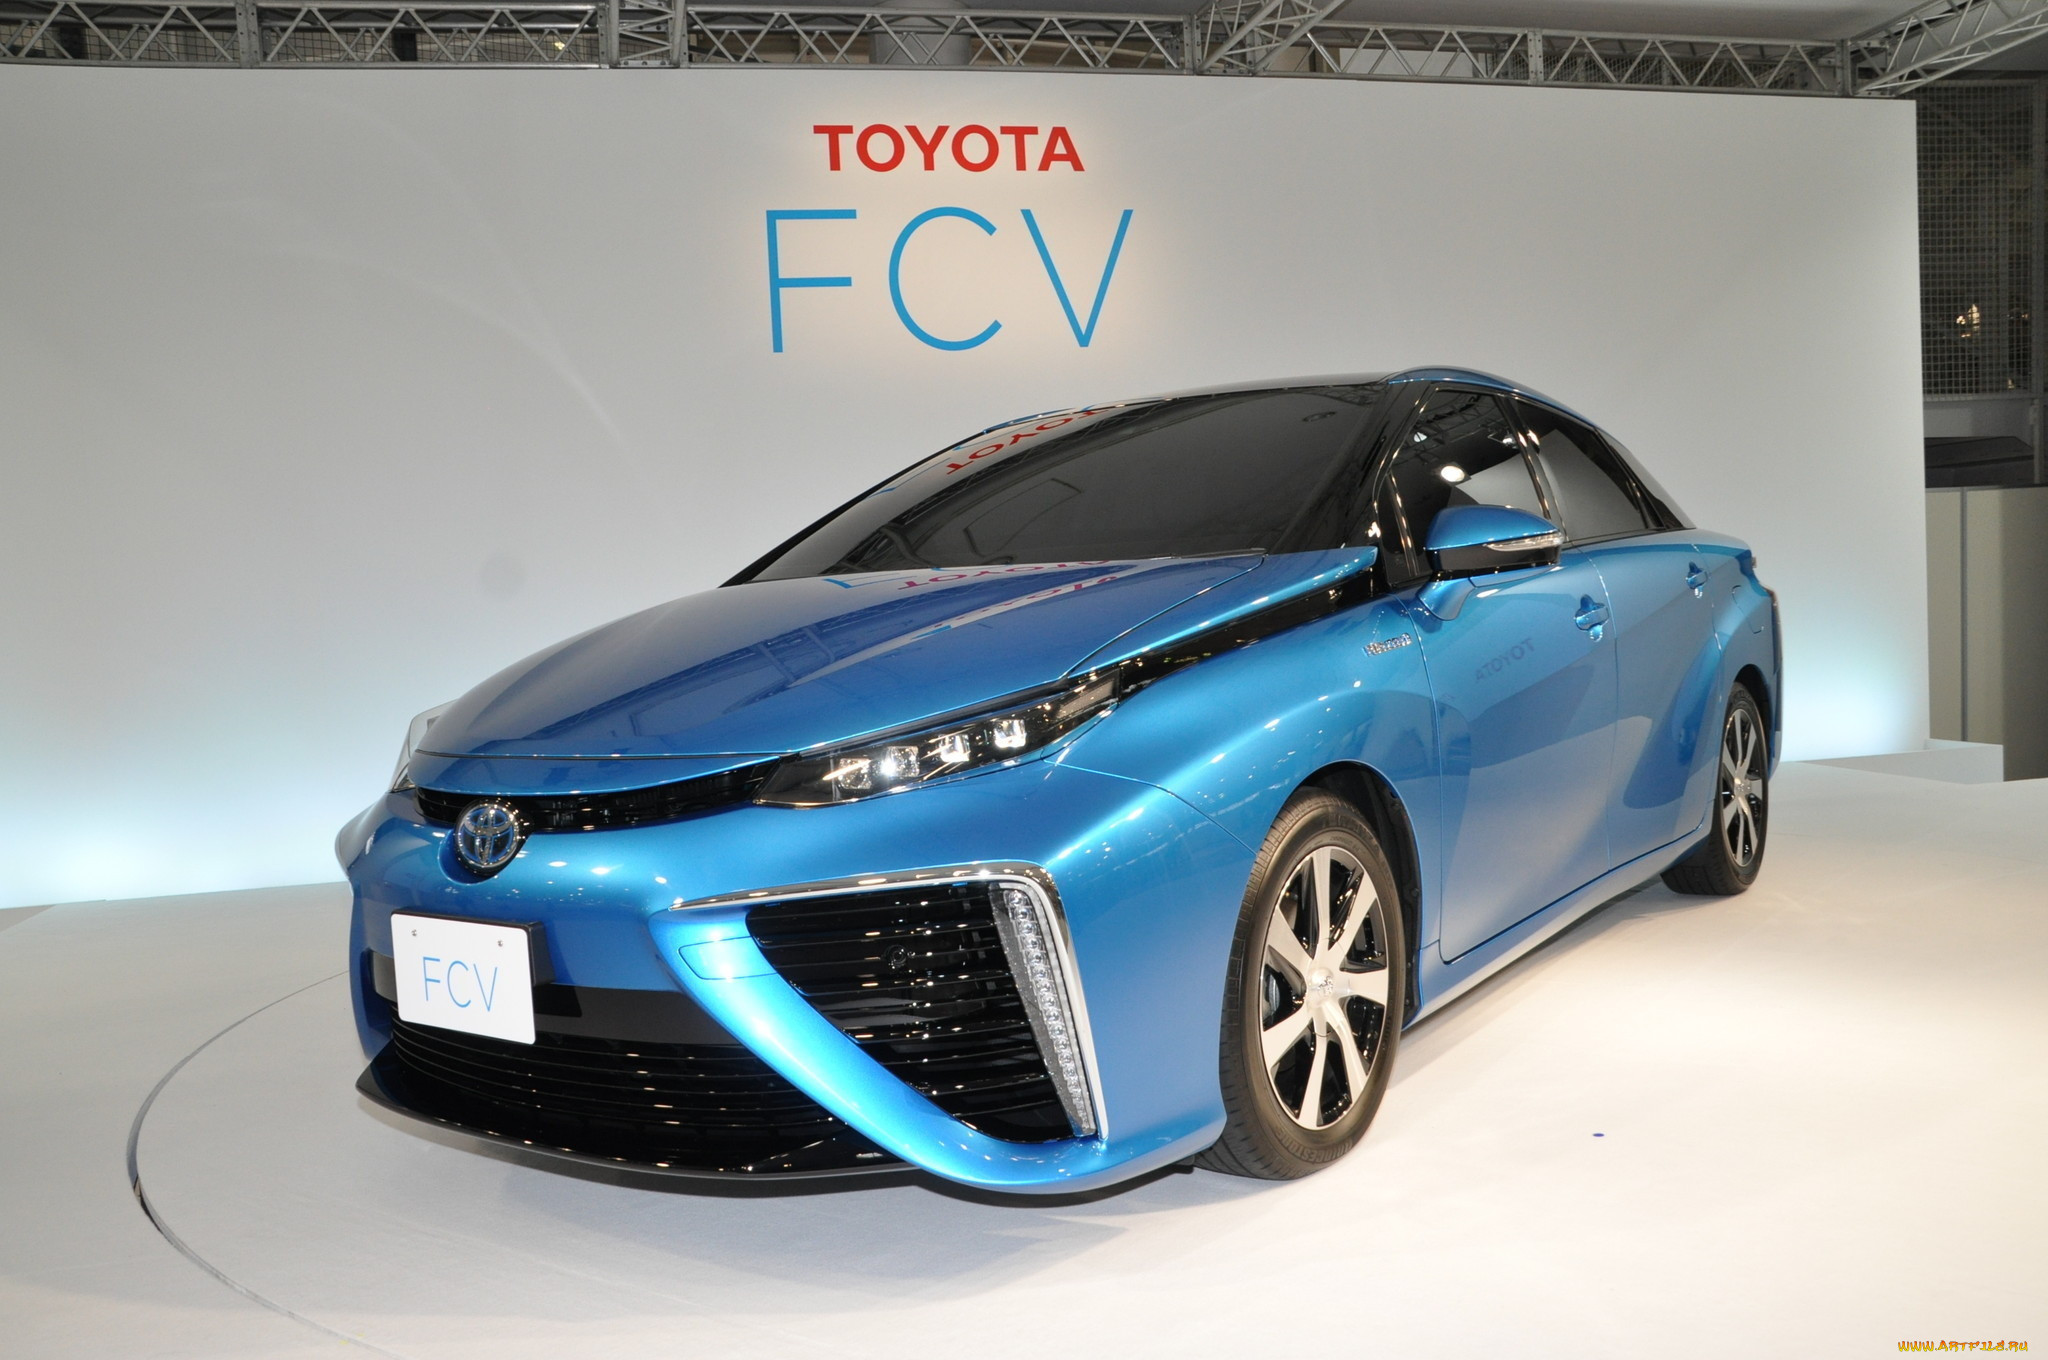 toyota fcv fuel cell vehicle hydrogen concept 2015, , toyota, vehicle, cell, 2015, concept, hydrogen, fcv, fuel